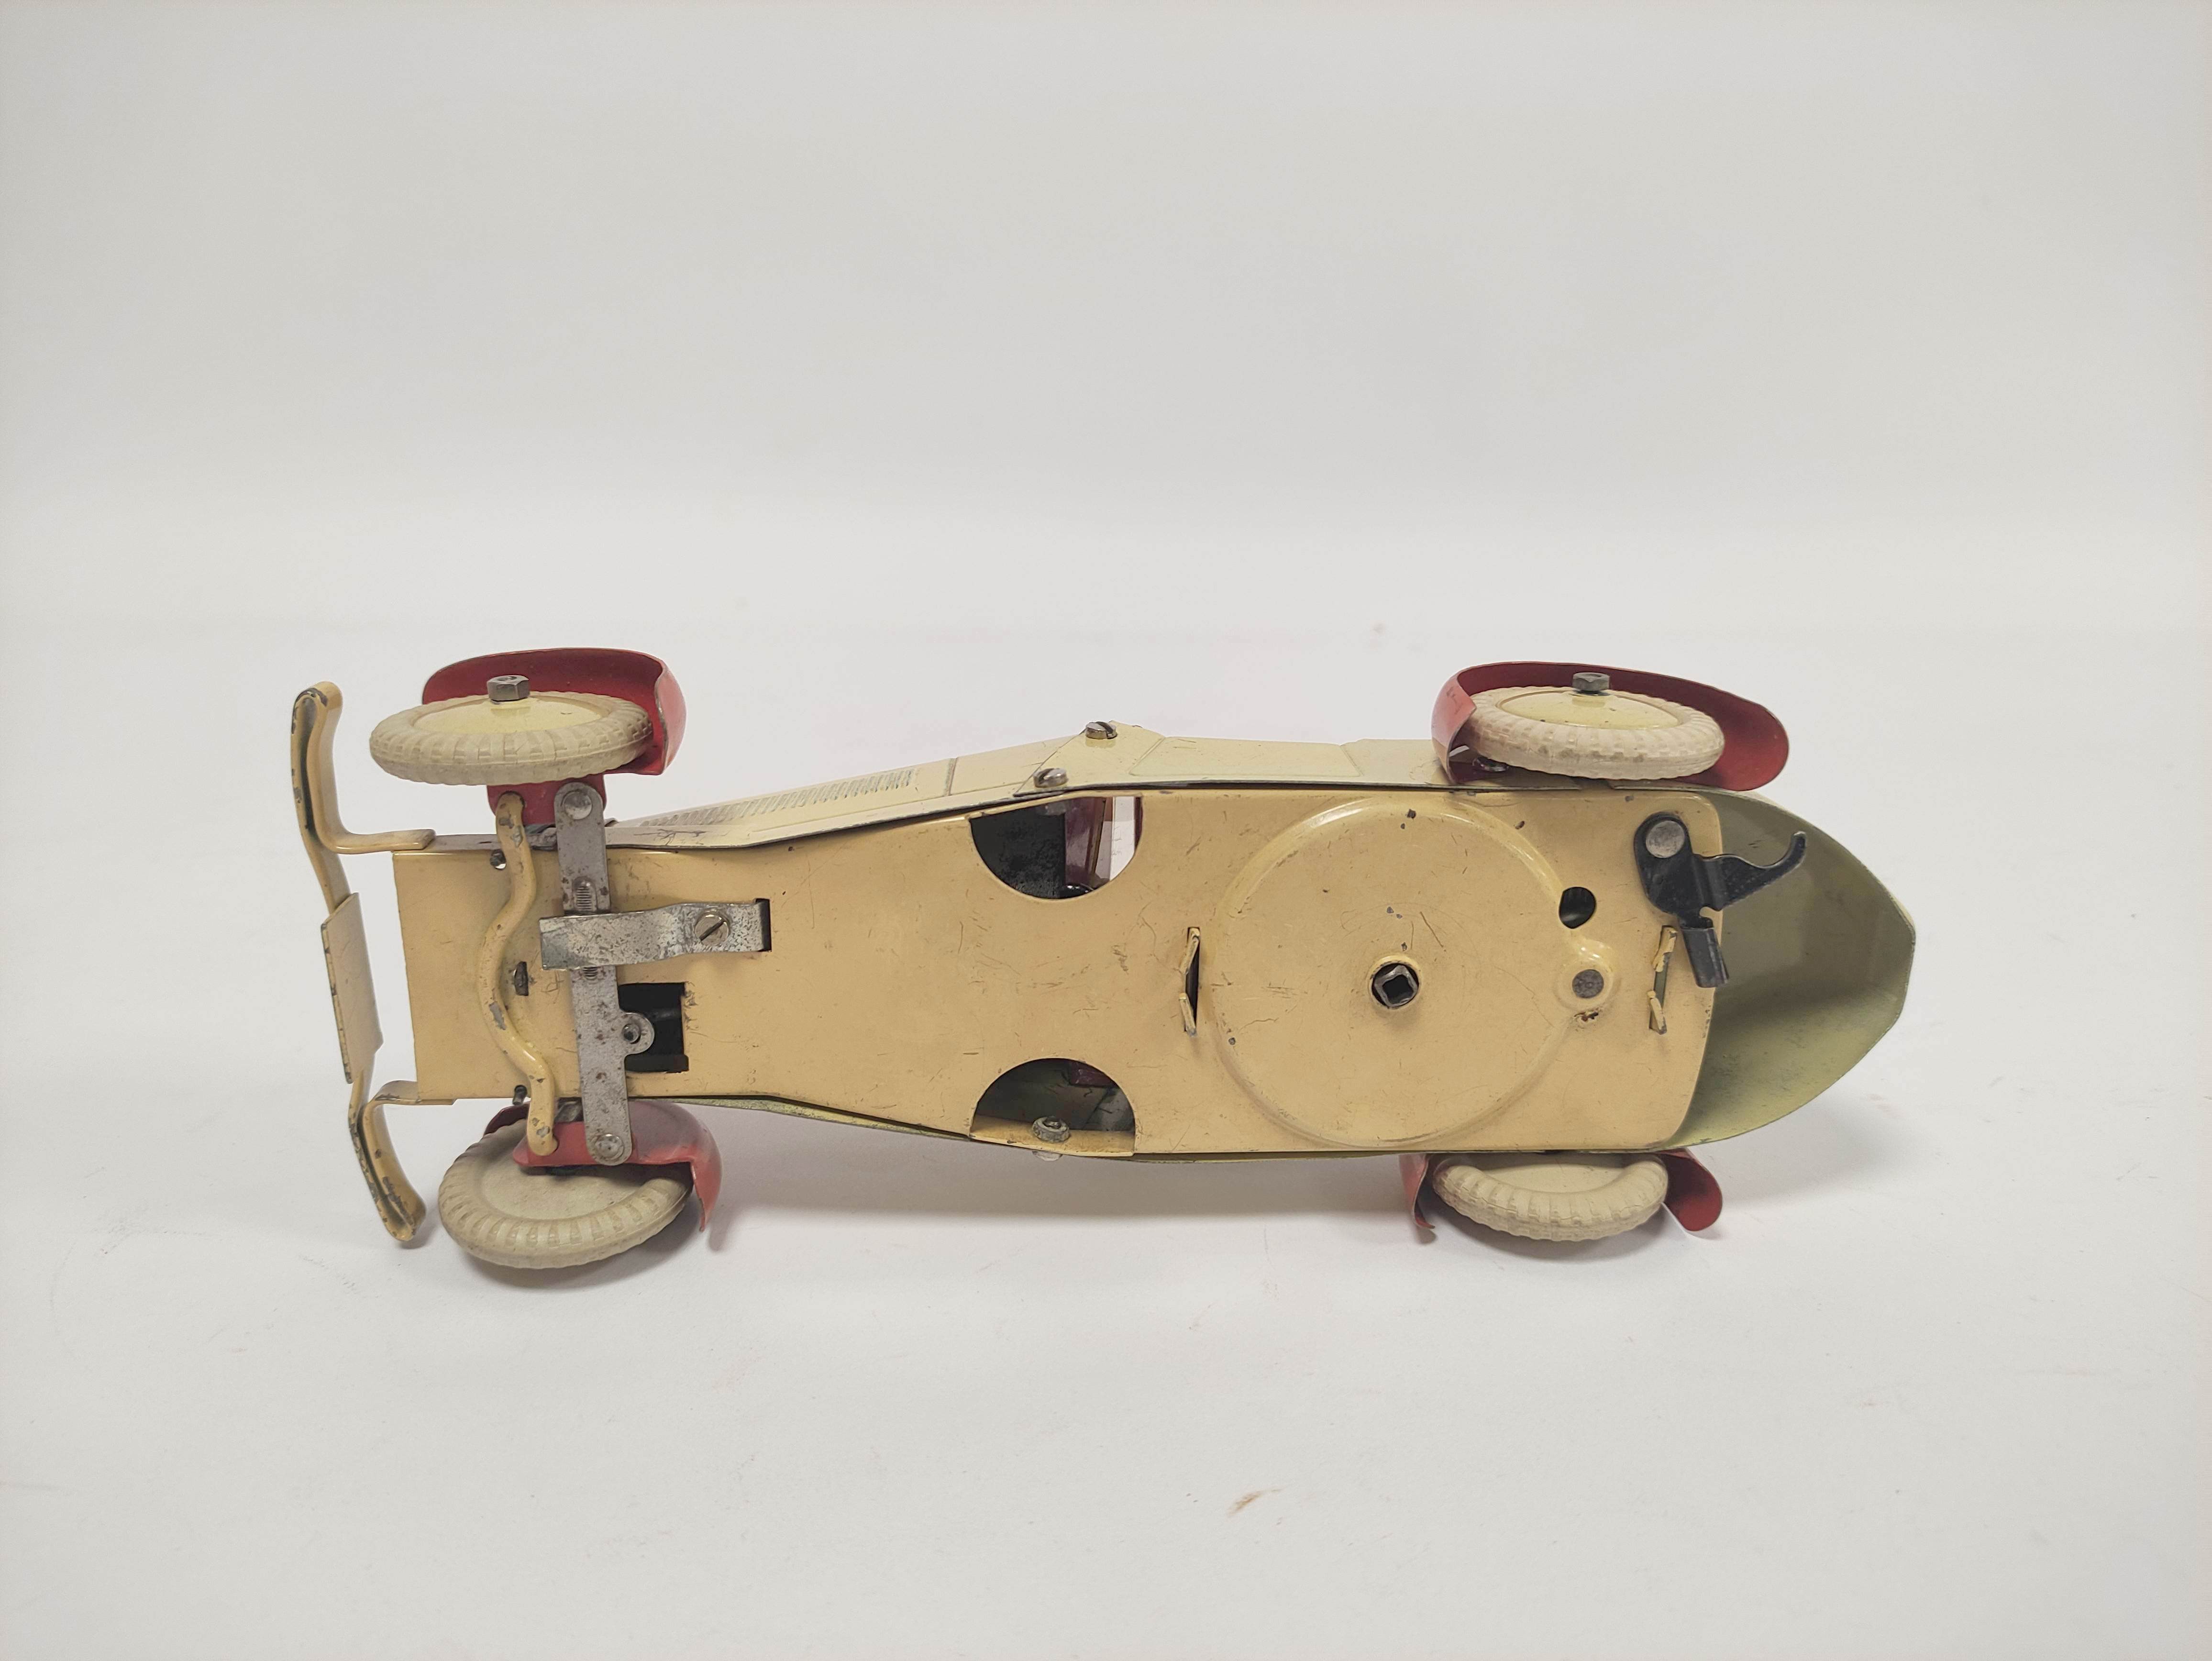 Meccano Constructors Car No 1 with cream body, red mud guards and die cast driver, Meccano Ltd stamp - Image 5 of 6